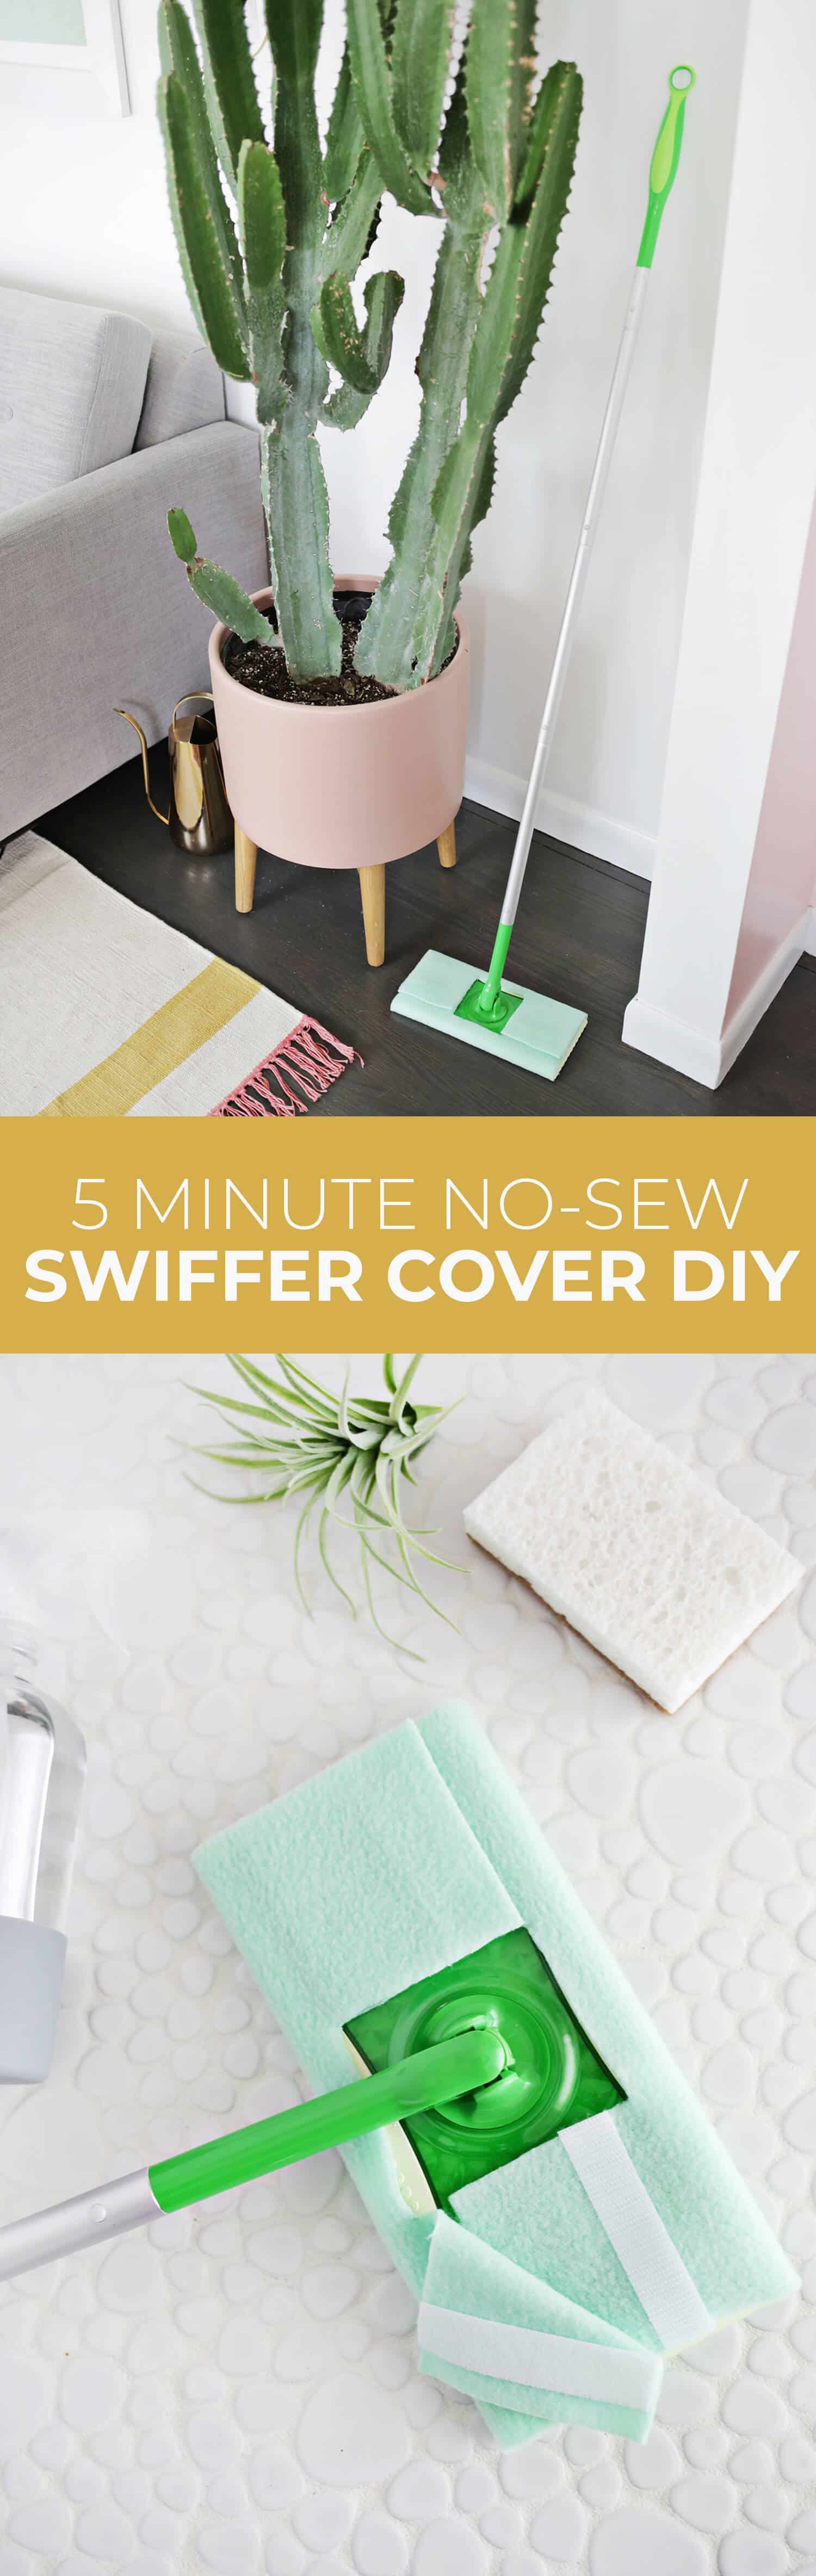 5 Minute Reusable Swiffer Cover Diy No Sew A Beautiful Mess